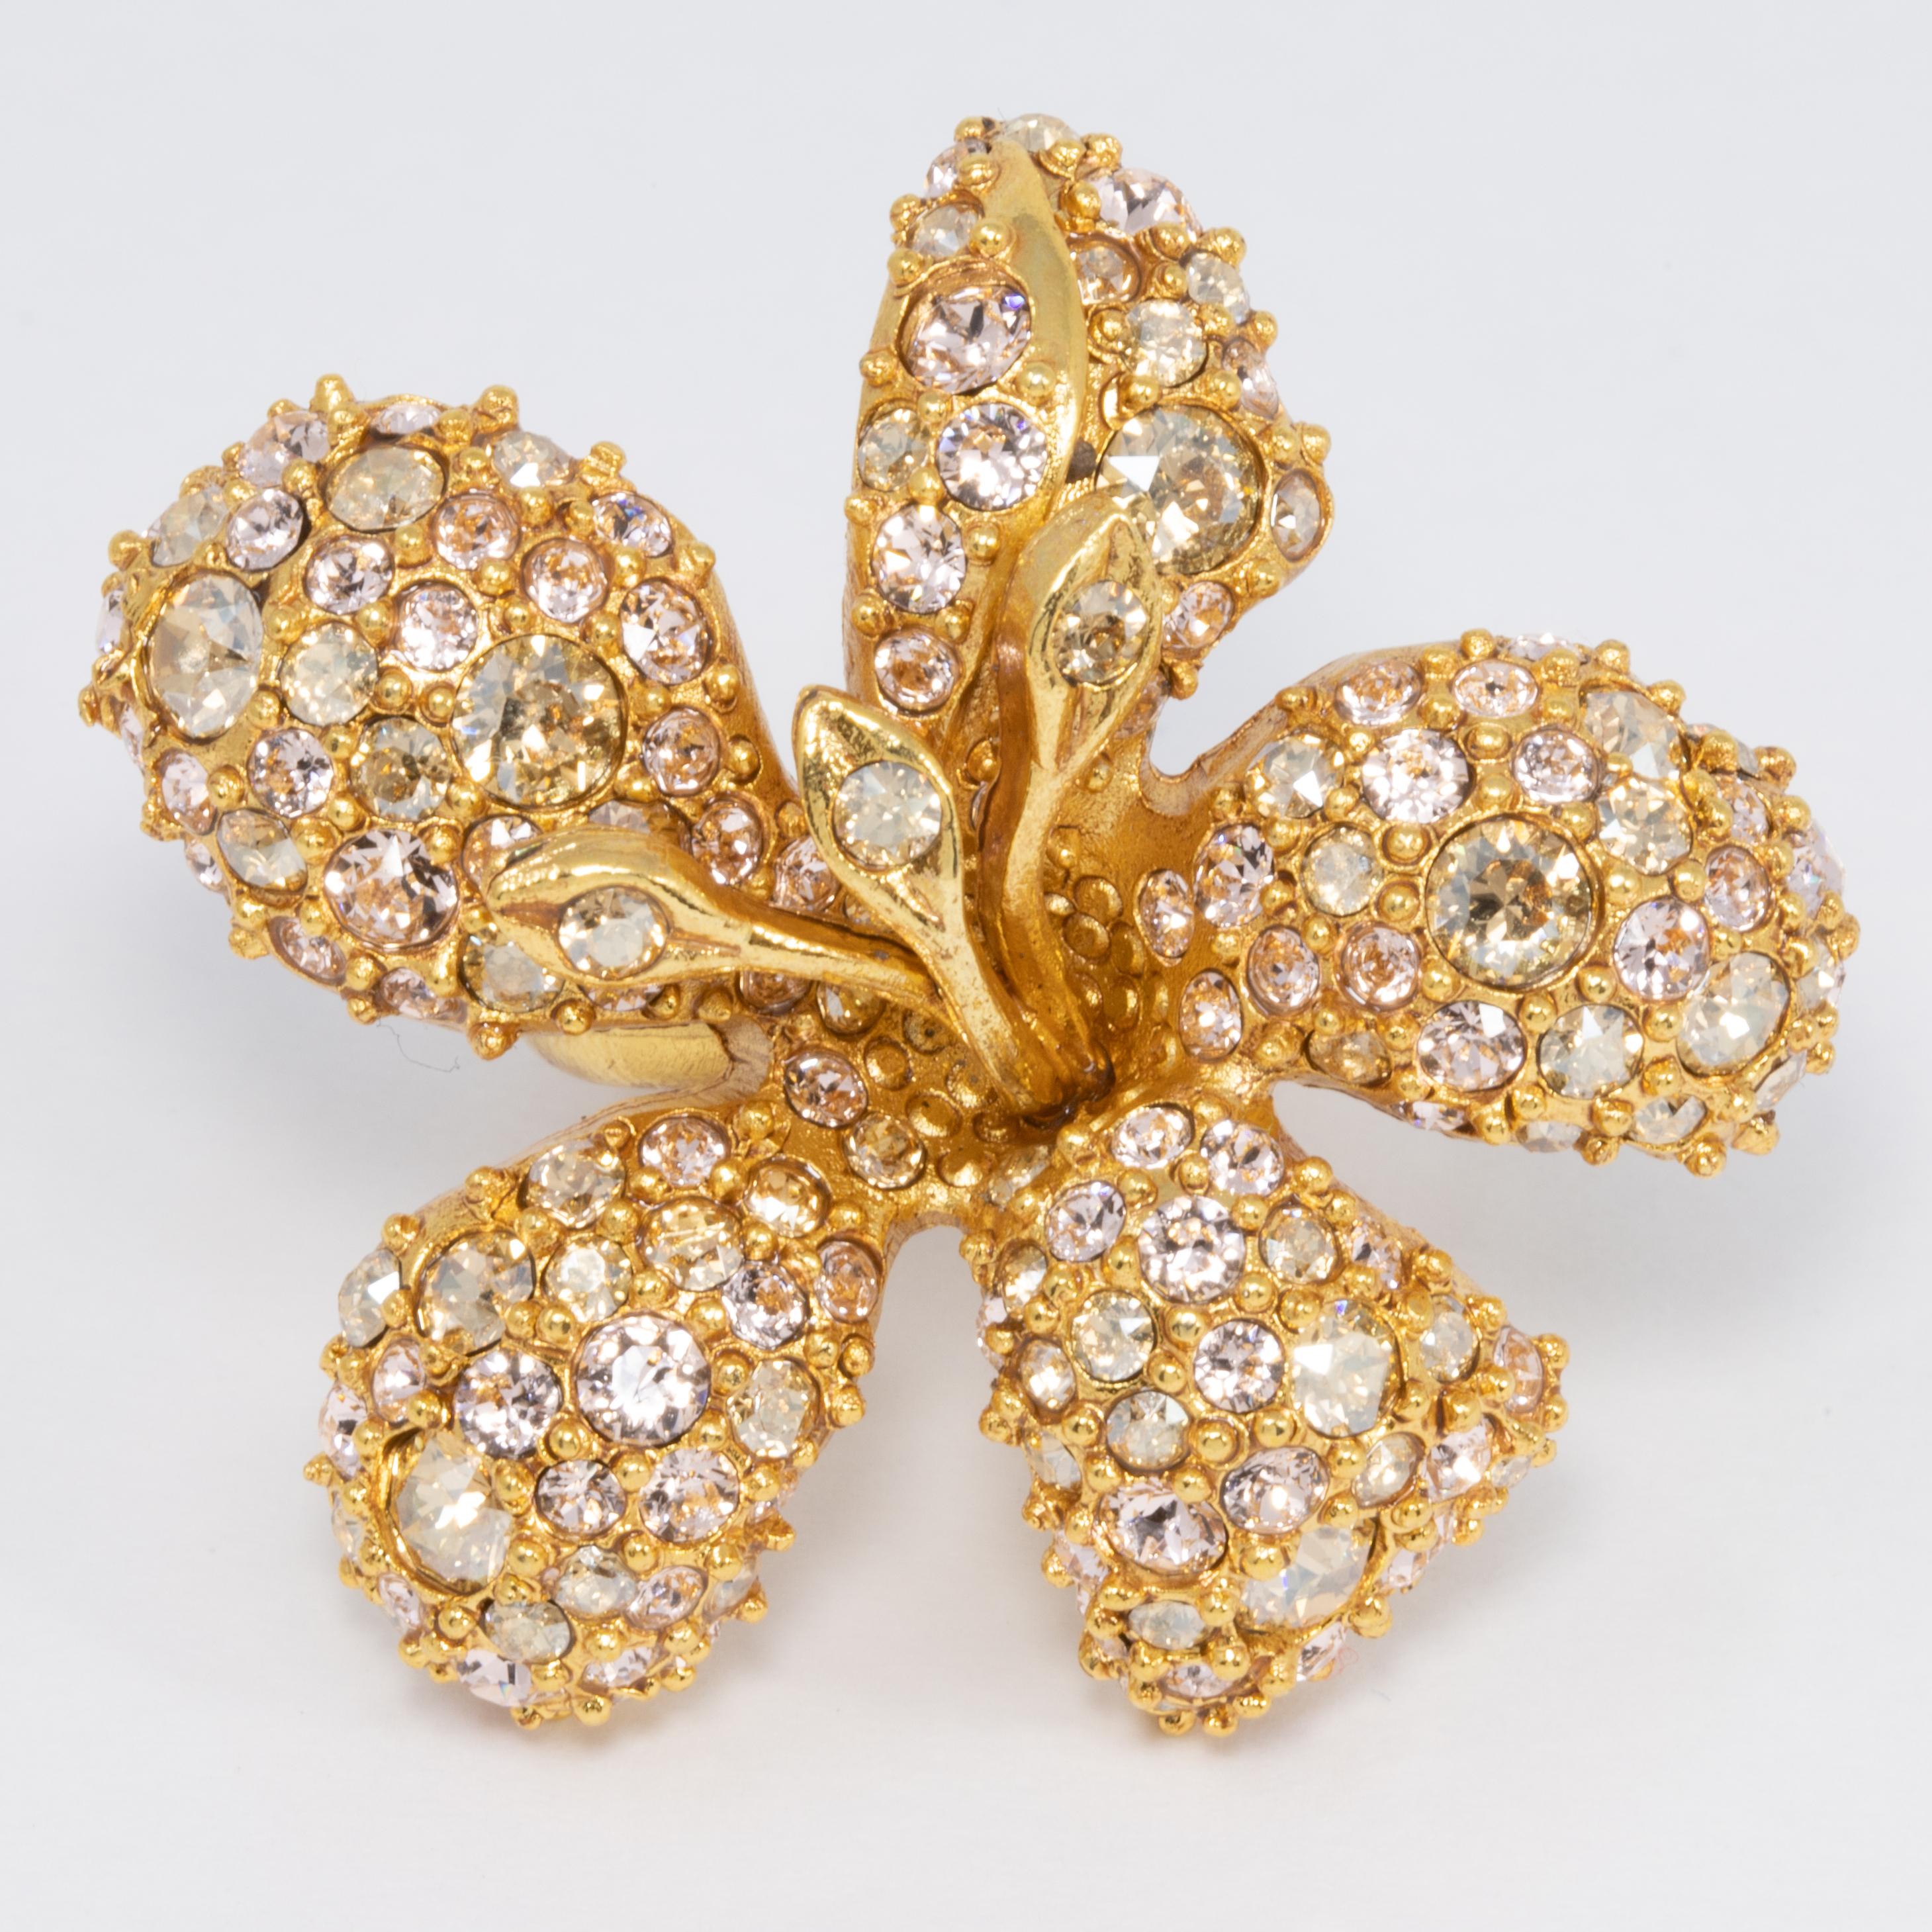 Champagne colored pave Swarovski crystals decorate this glowing golden flower ring. A touch of tasteful extravagance from Oscar de la Renta!

24K Gold-plated.

Adjustable sizes 5 to 8.5

Tags, Marks, Hallmarks: Oscar de la Renta, Made in USA
